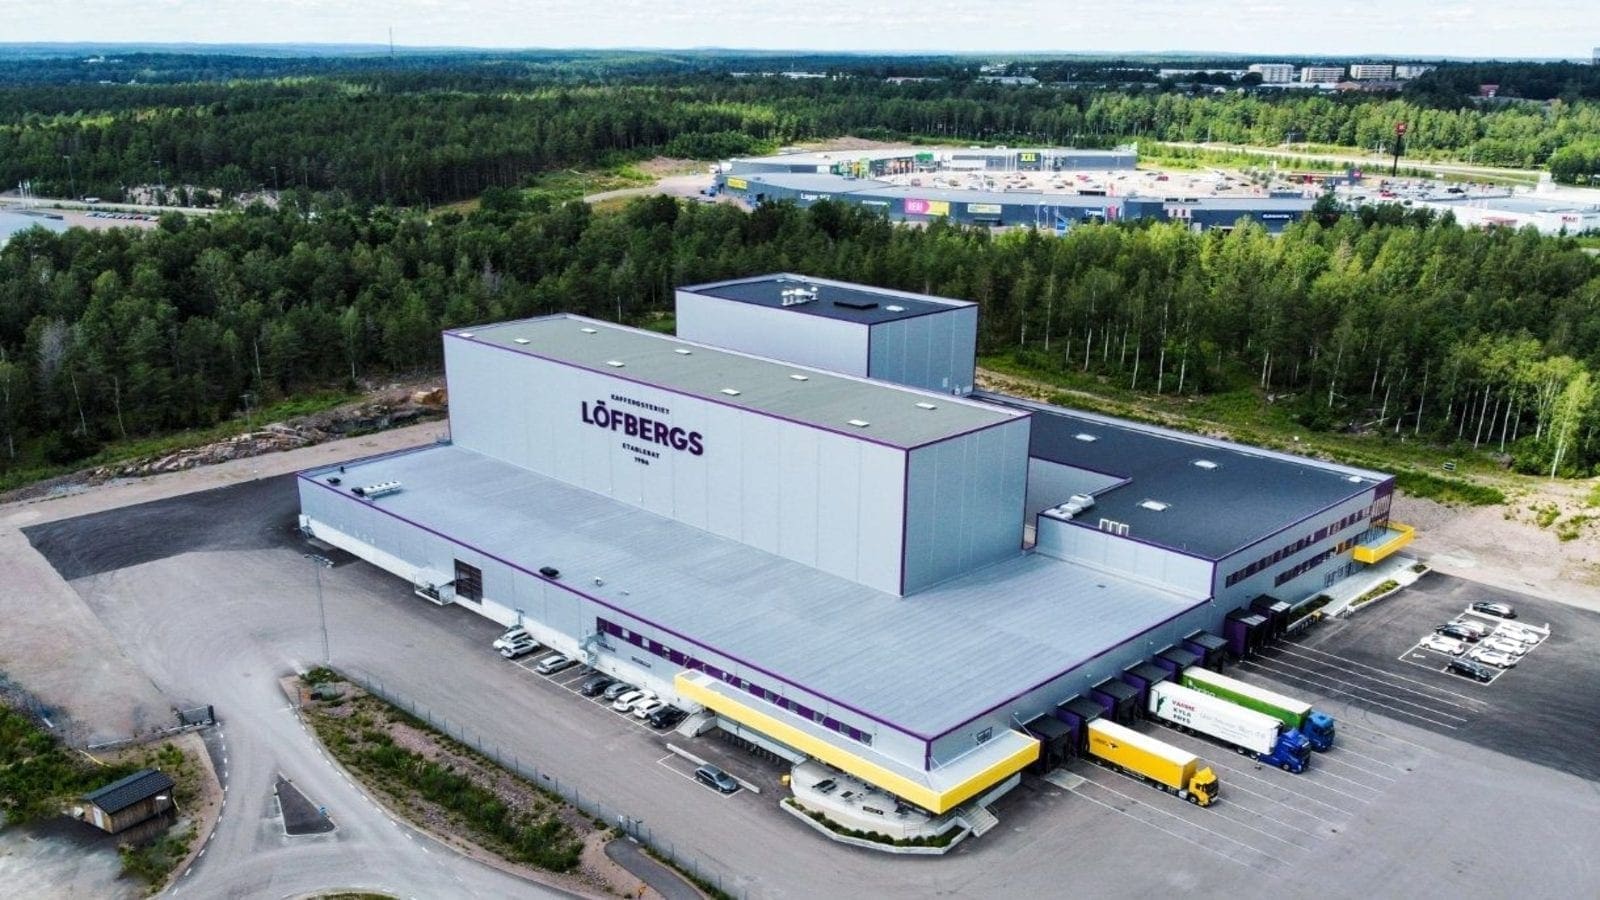 Löfbergs opens new coffee roastery in Sweden as Mondelēz invests US$59m in modernization of French bakery plant